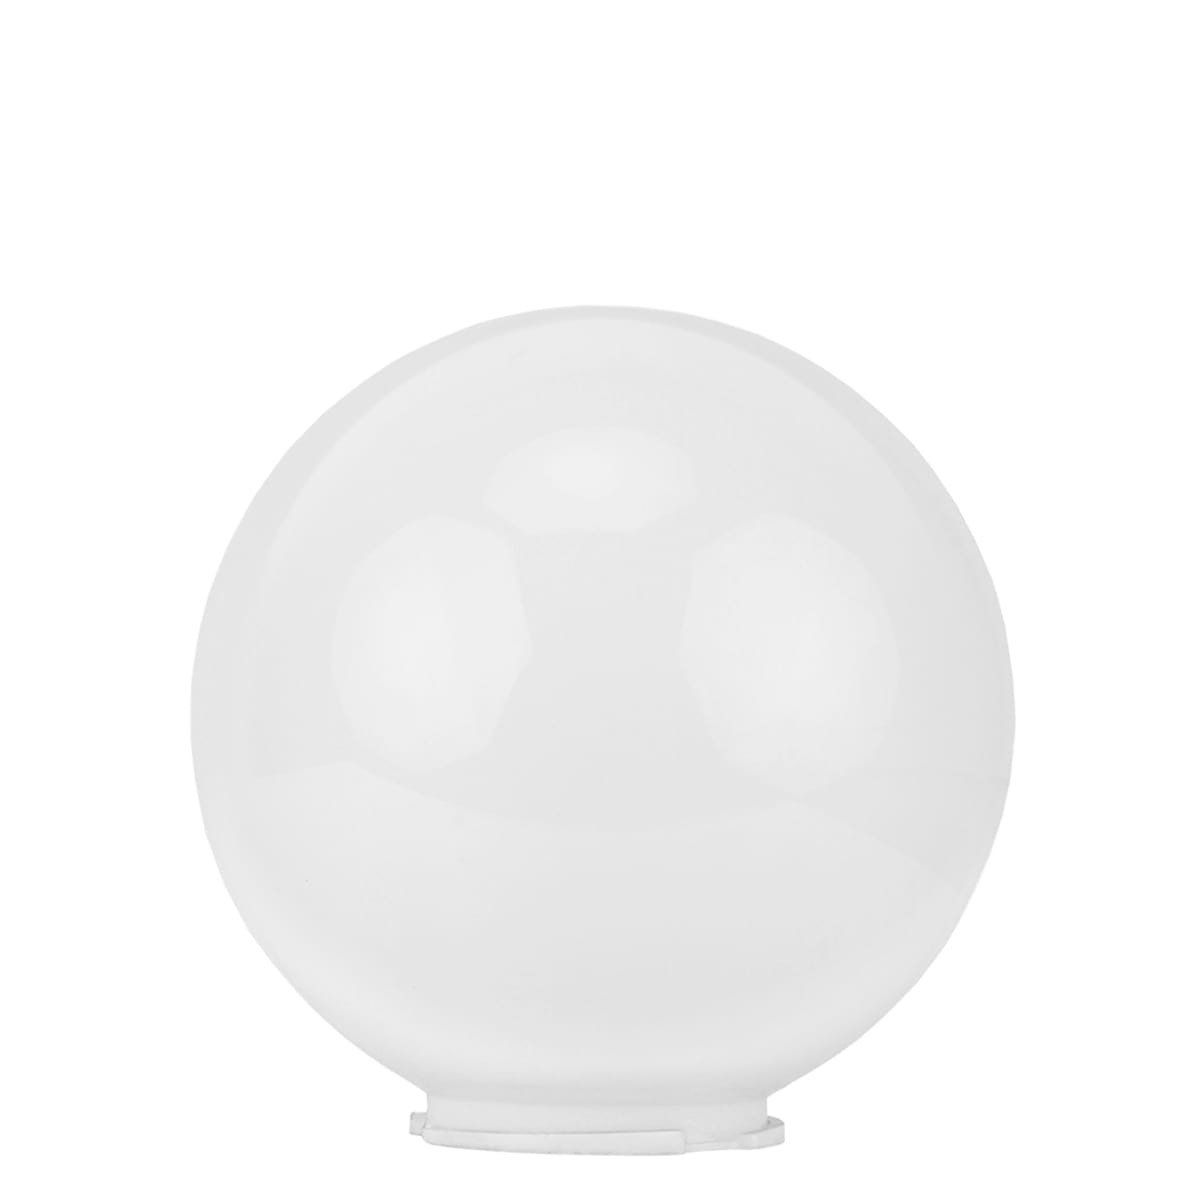 Outdoor Lighting Components Loose sphere plastic opal glass - Ø 20 cm